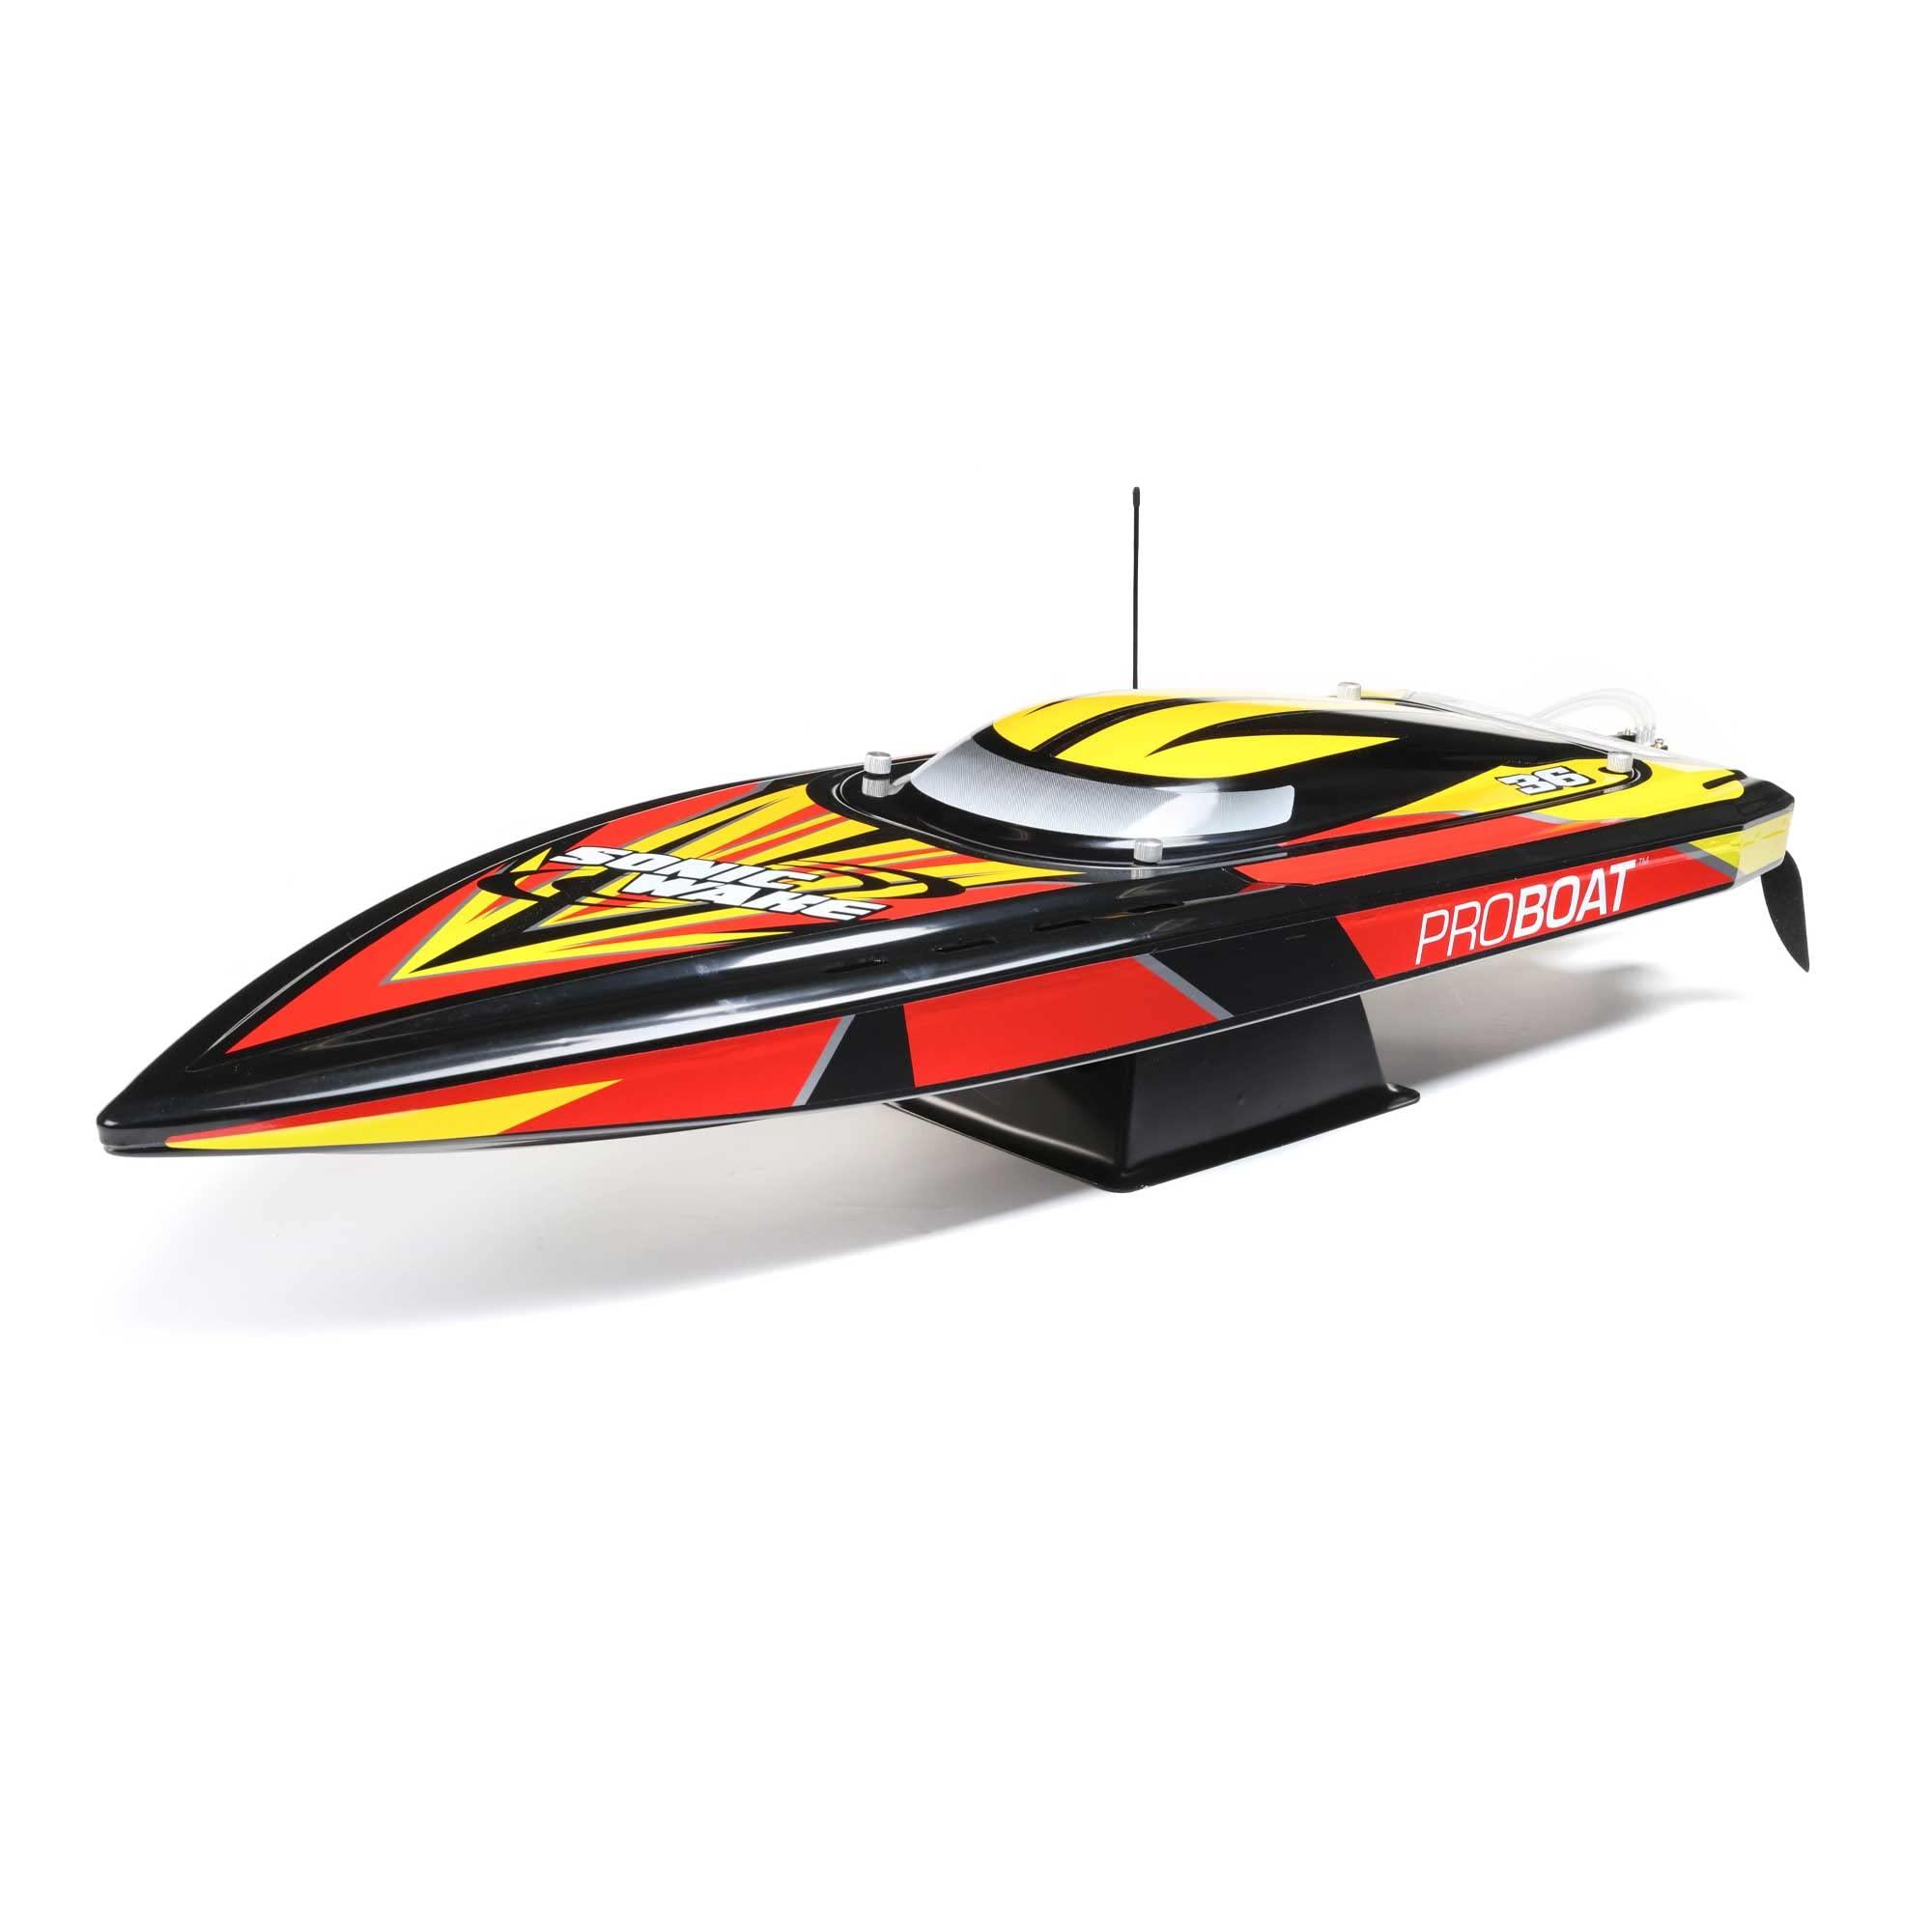 1/4 Rc Boat: Factors Affecting Maneuverability and Control in 1/4 RC Boats 